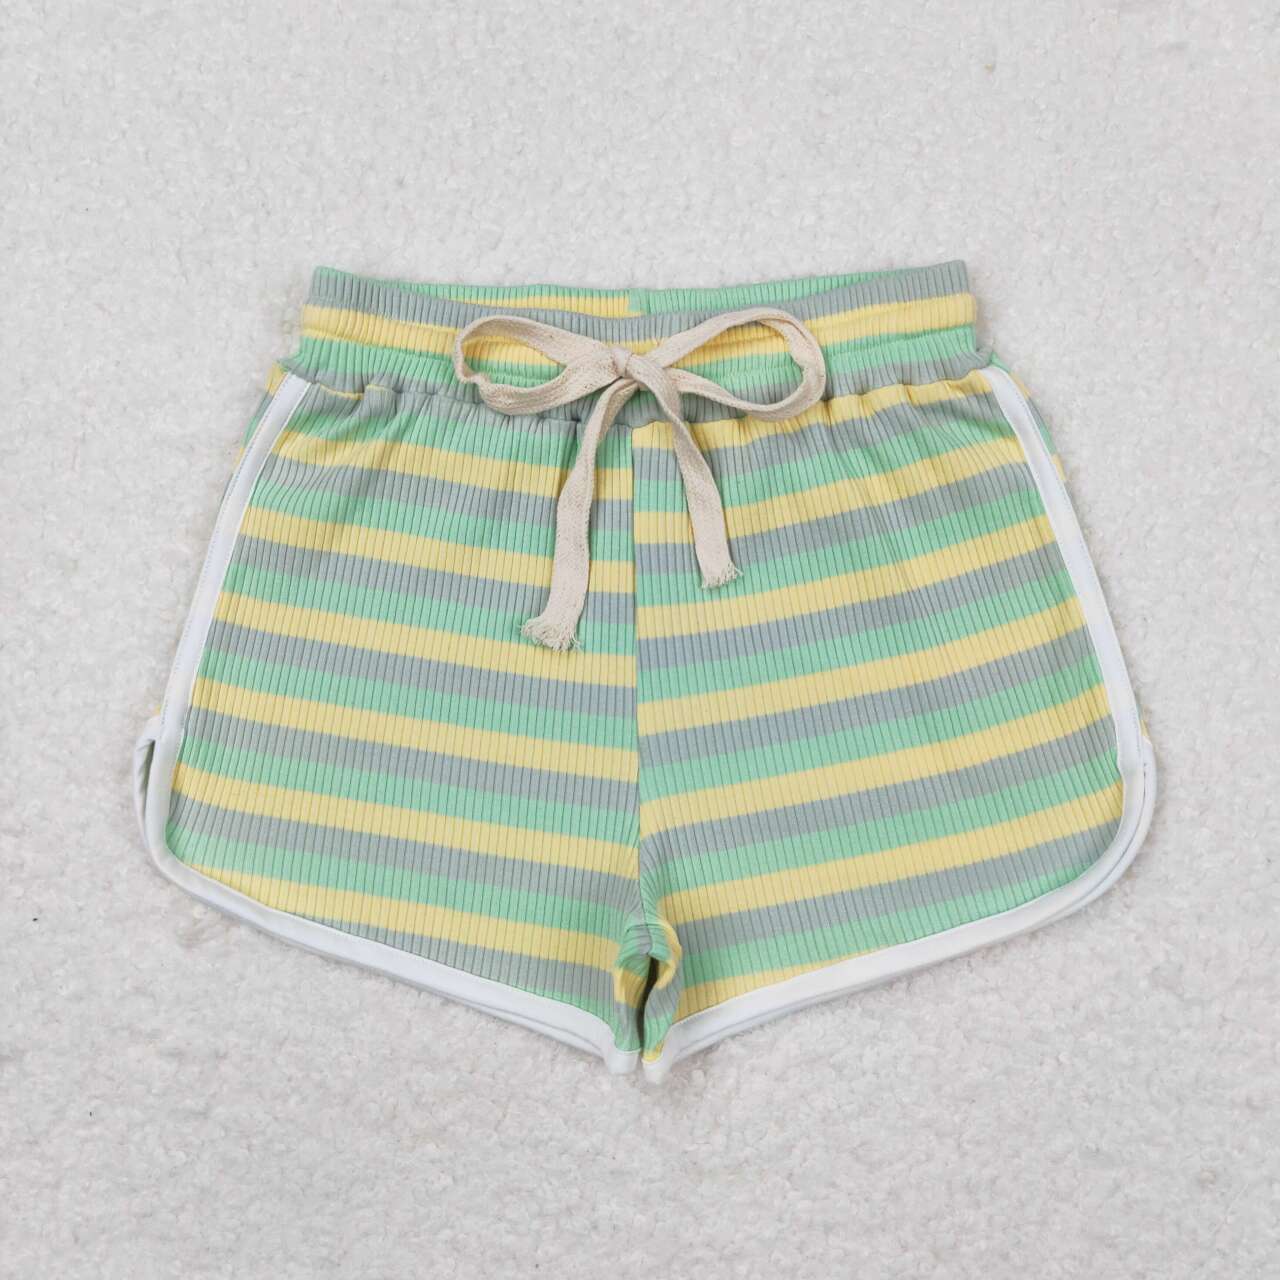 RTS SS0341Yellow, blue and green thick striped shorts